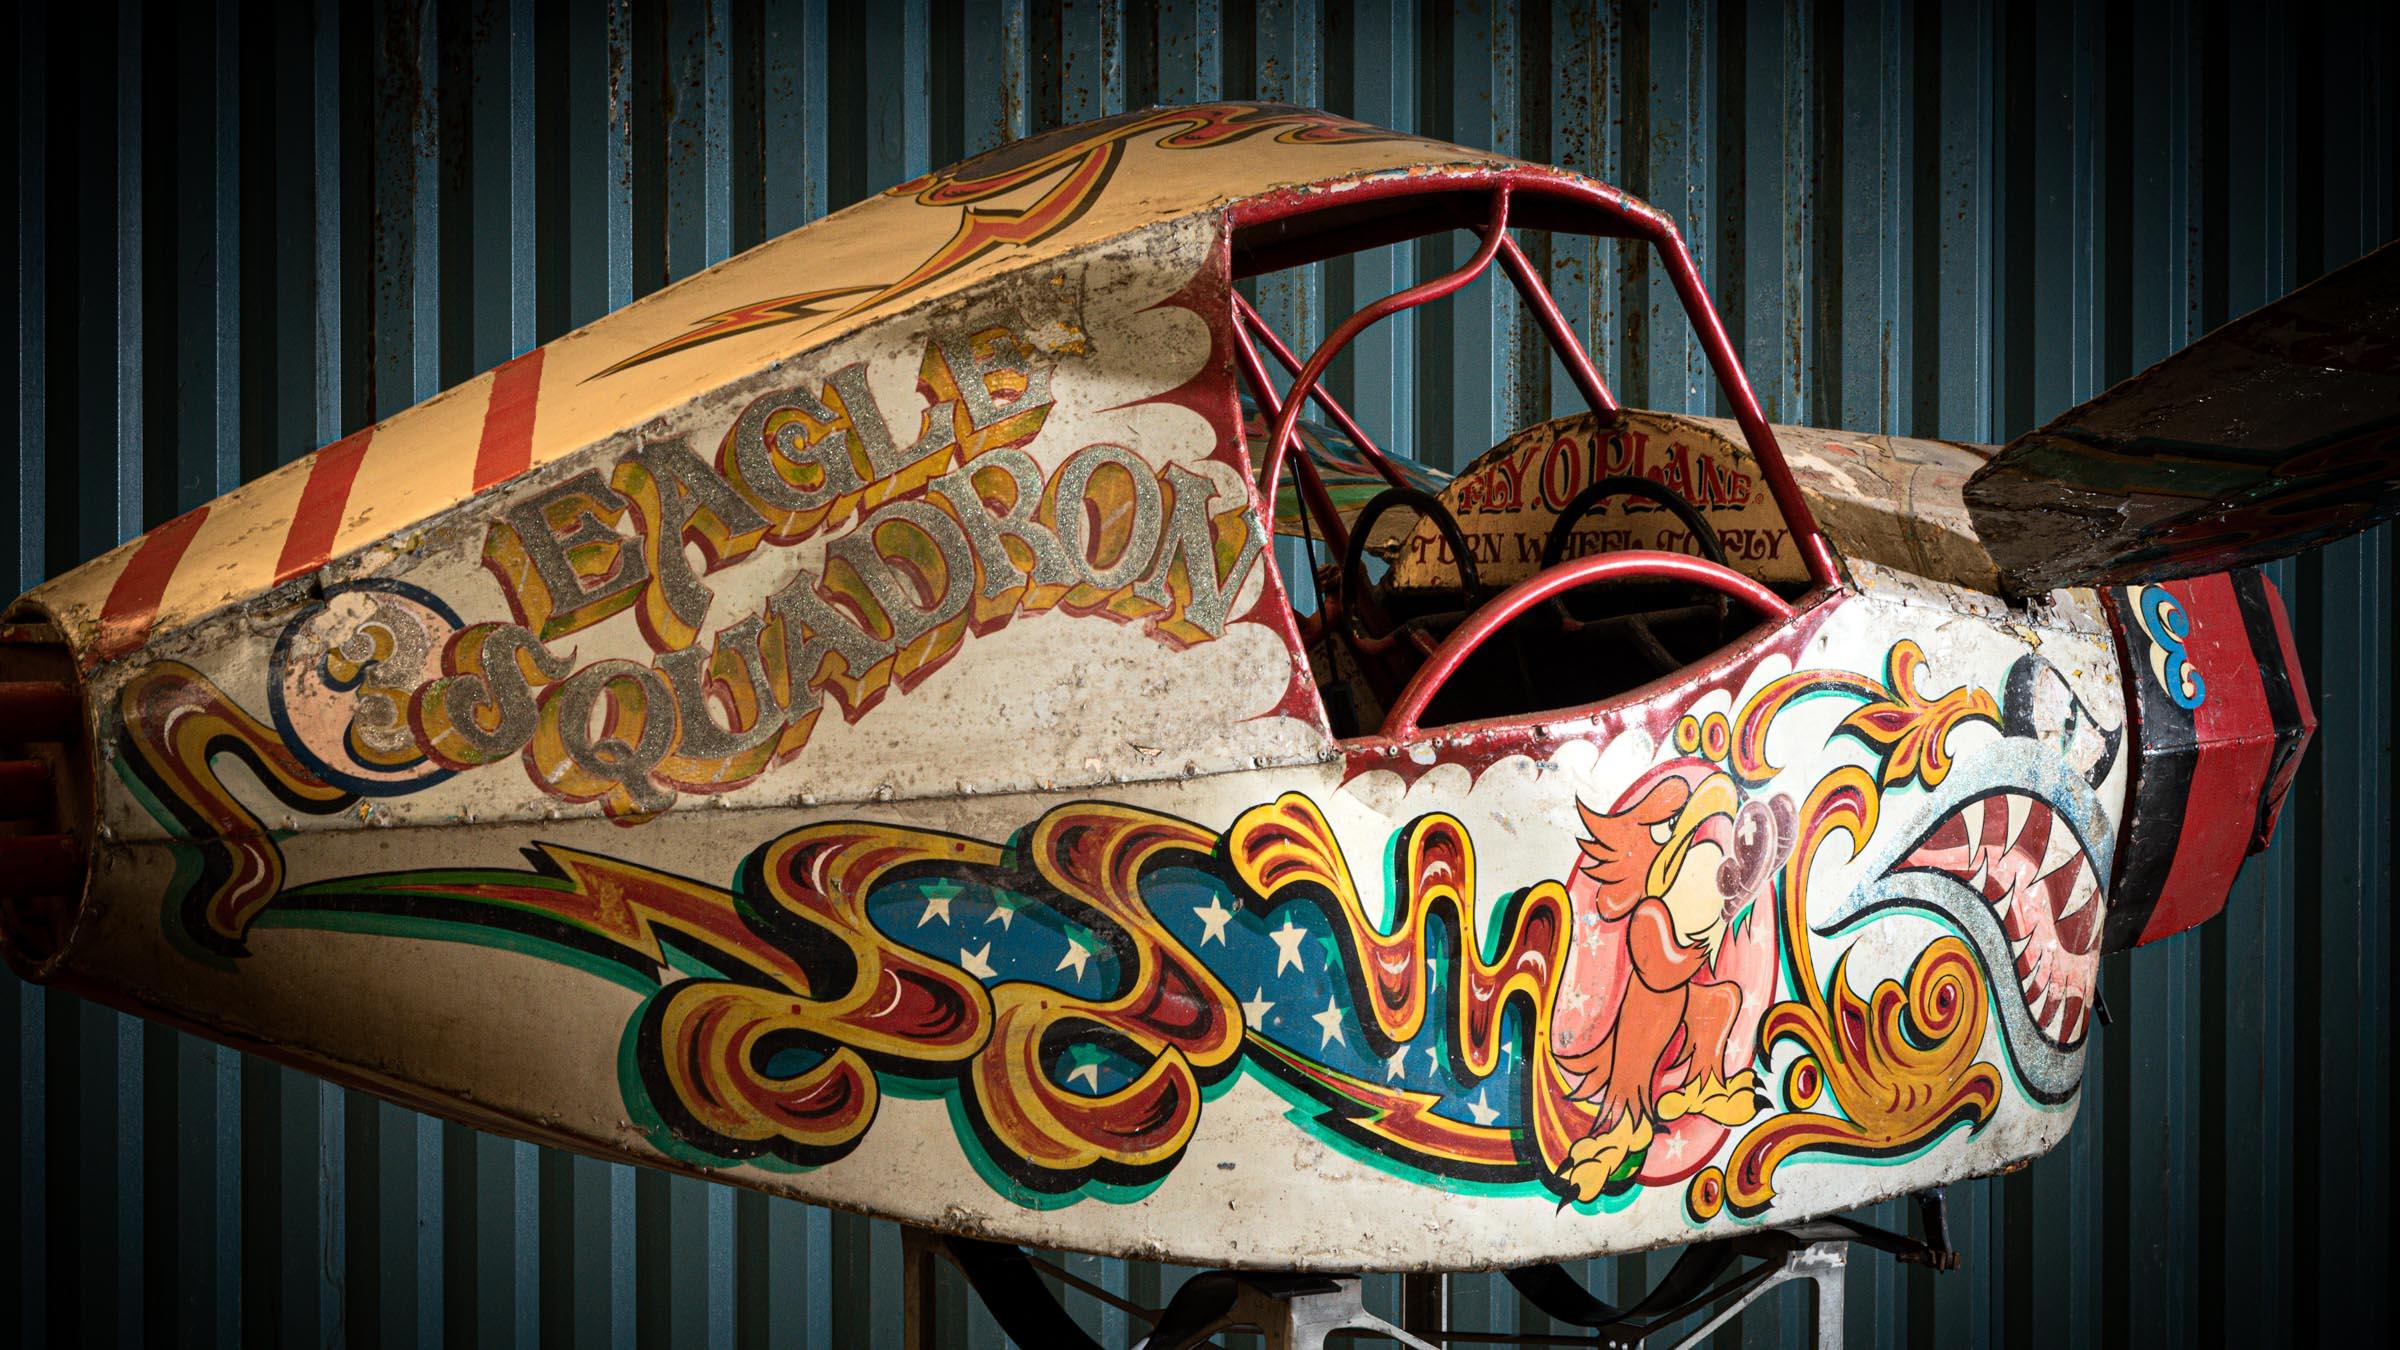 Masons Fly O Plane Number ‘3 - Eagle Squadron’. A stunning and most rarest of English fairground ride history and the art form that went hand in hand with this genre. Manufactured in the US in 1948, the ride was brought to the UK in 1951 for the